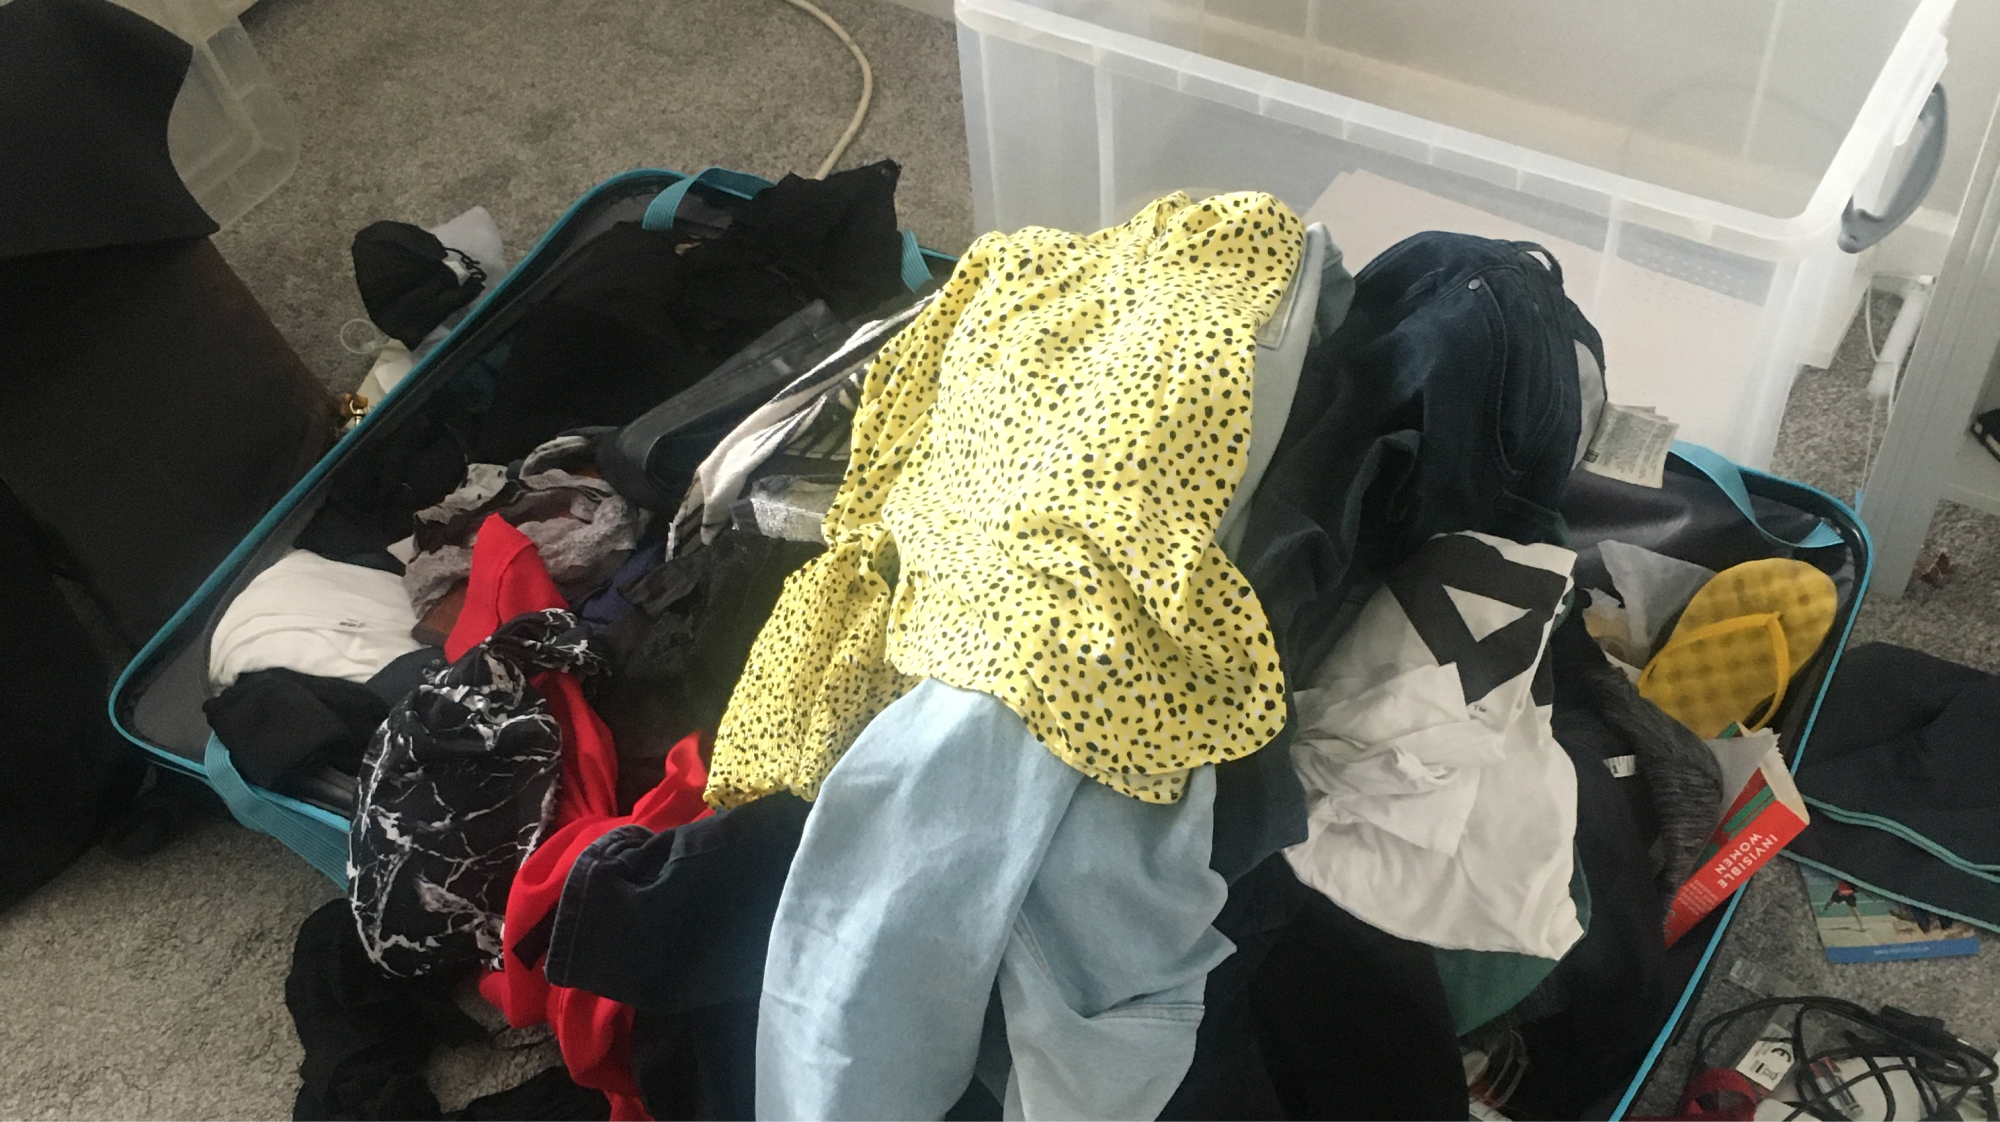 A messy suitcase full of clothes in a messy room